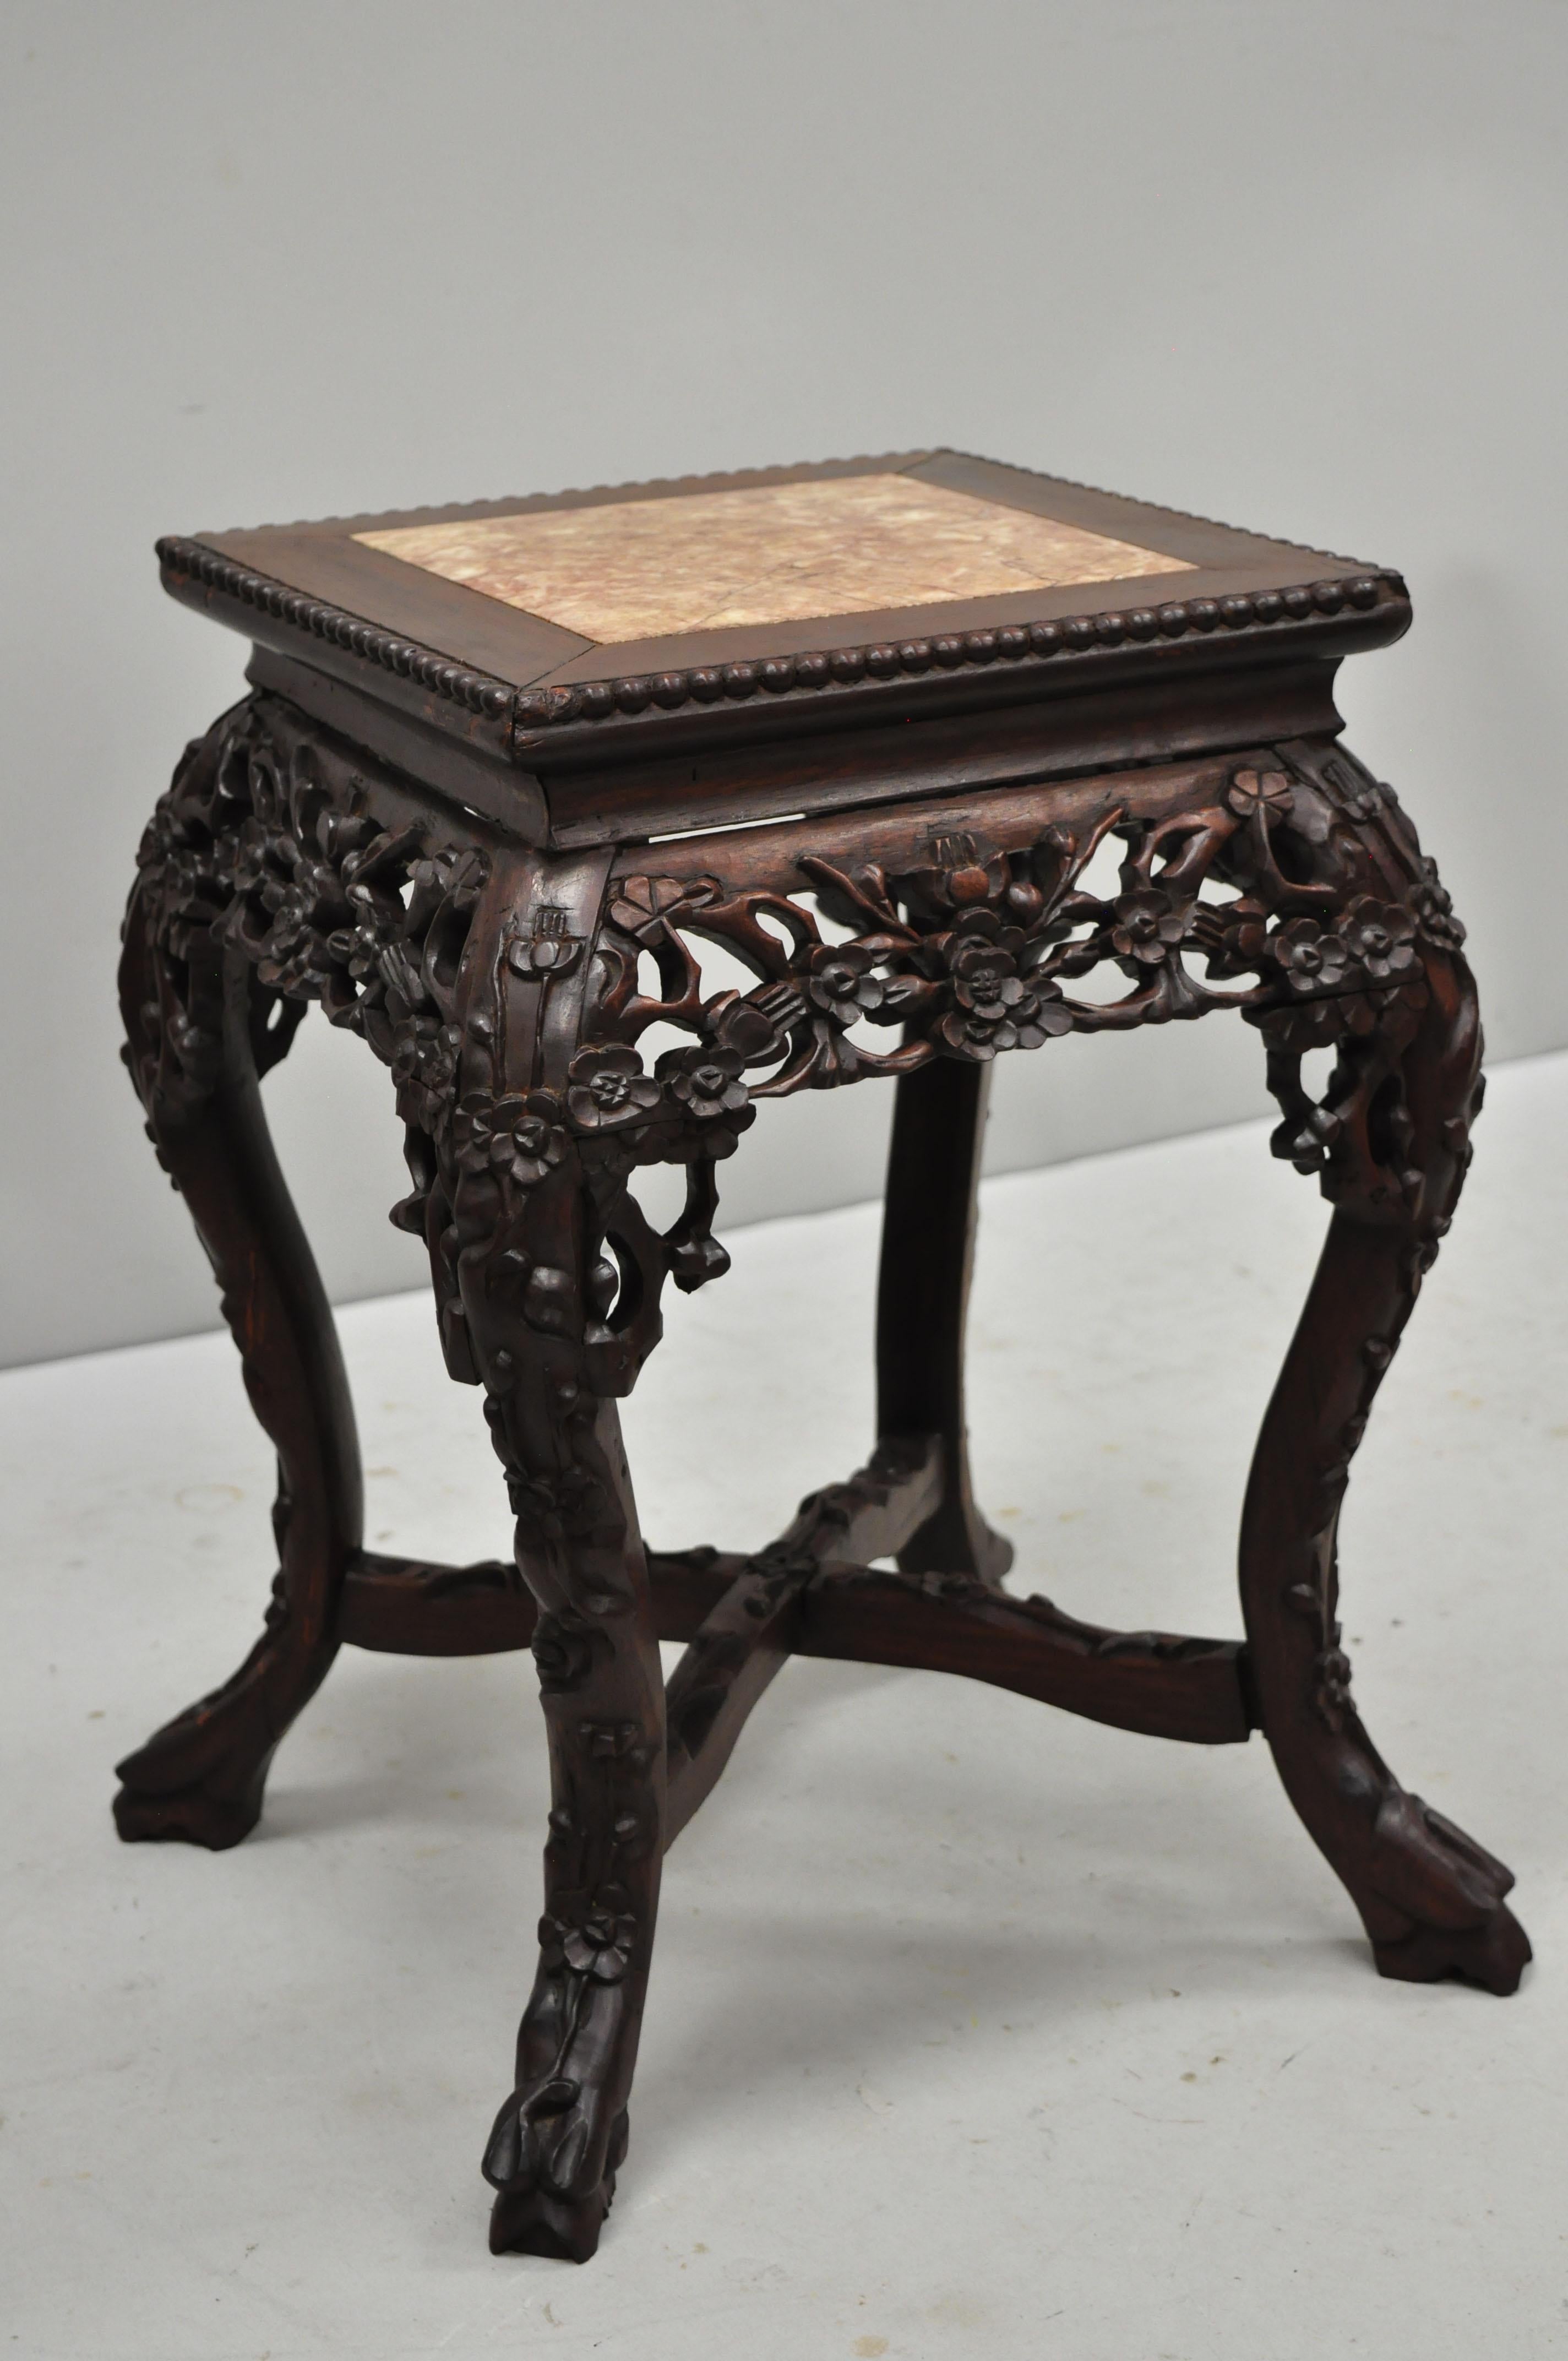 Antique carved hardwood rosewood and square marble top Chinese pedestal table (D). Item inset marble-top, pierce carved floral skirt, carved stretcher base, solid wood construction, finely carved details, very nice antique item, circa late 19th-20th